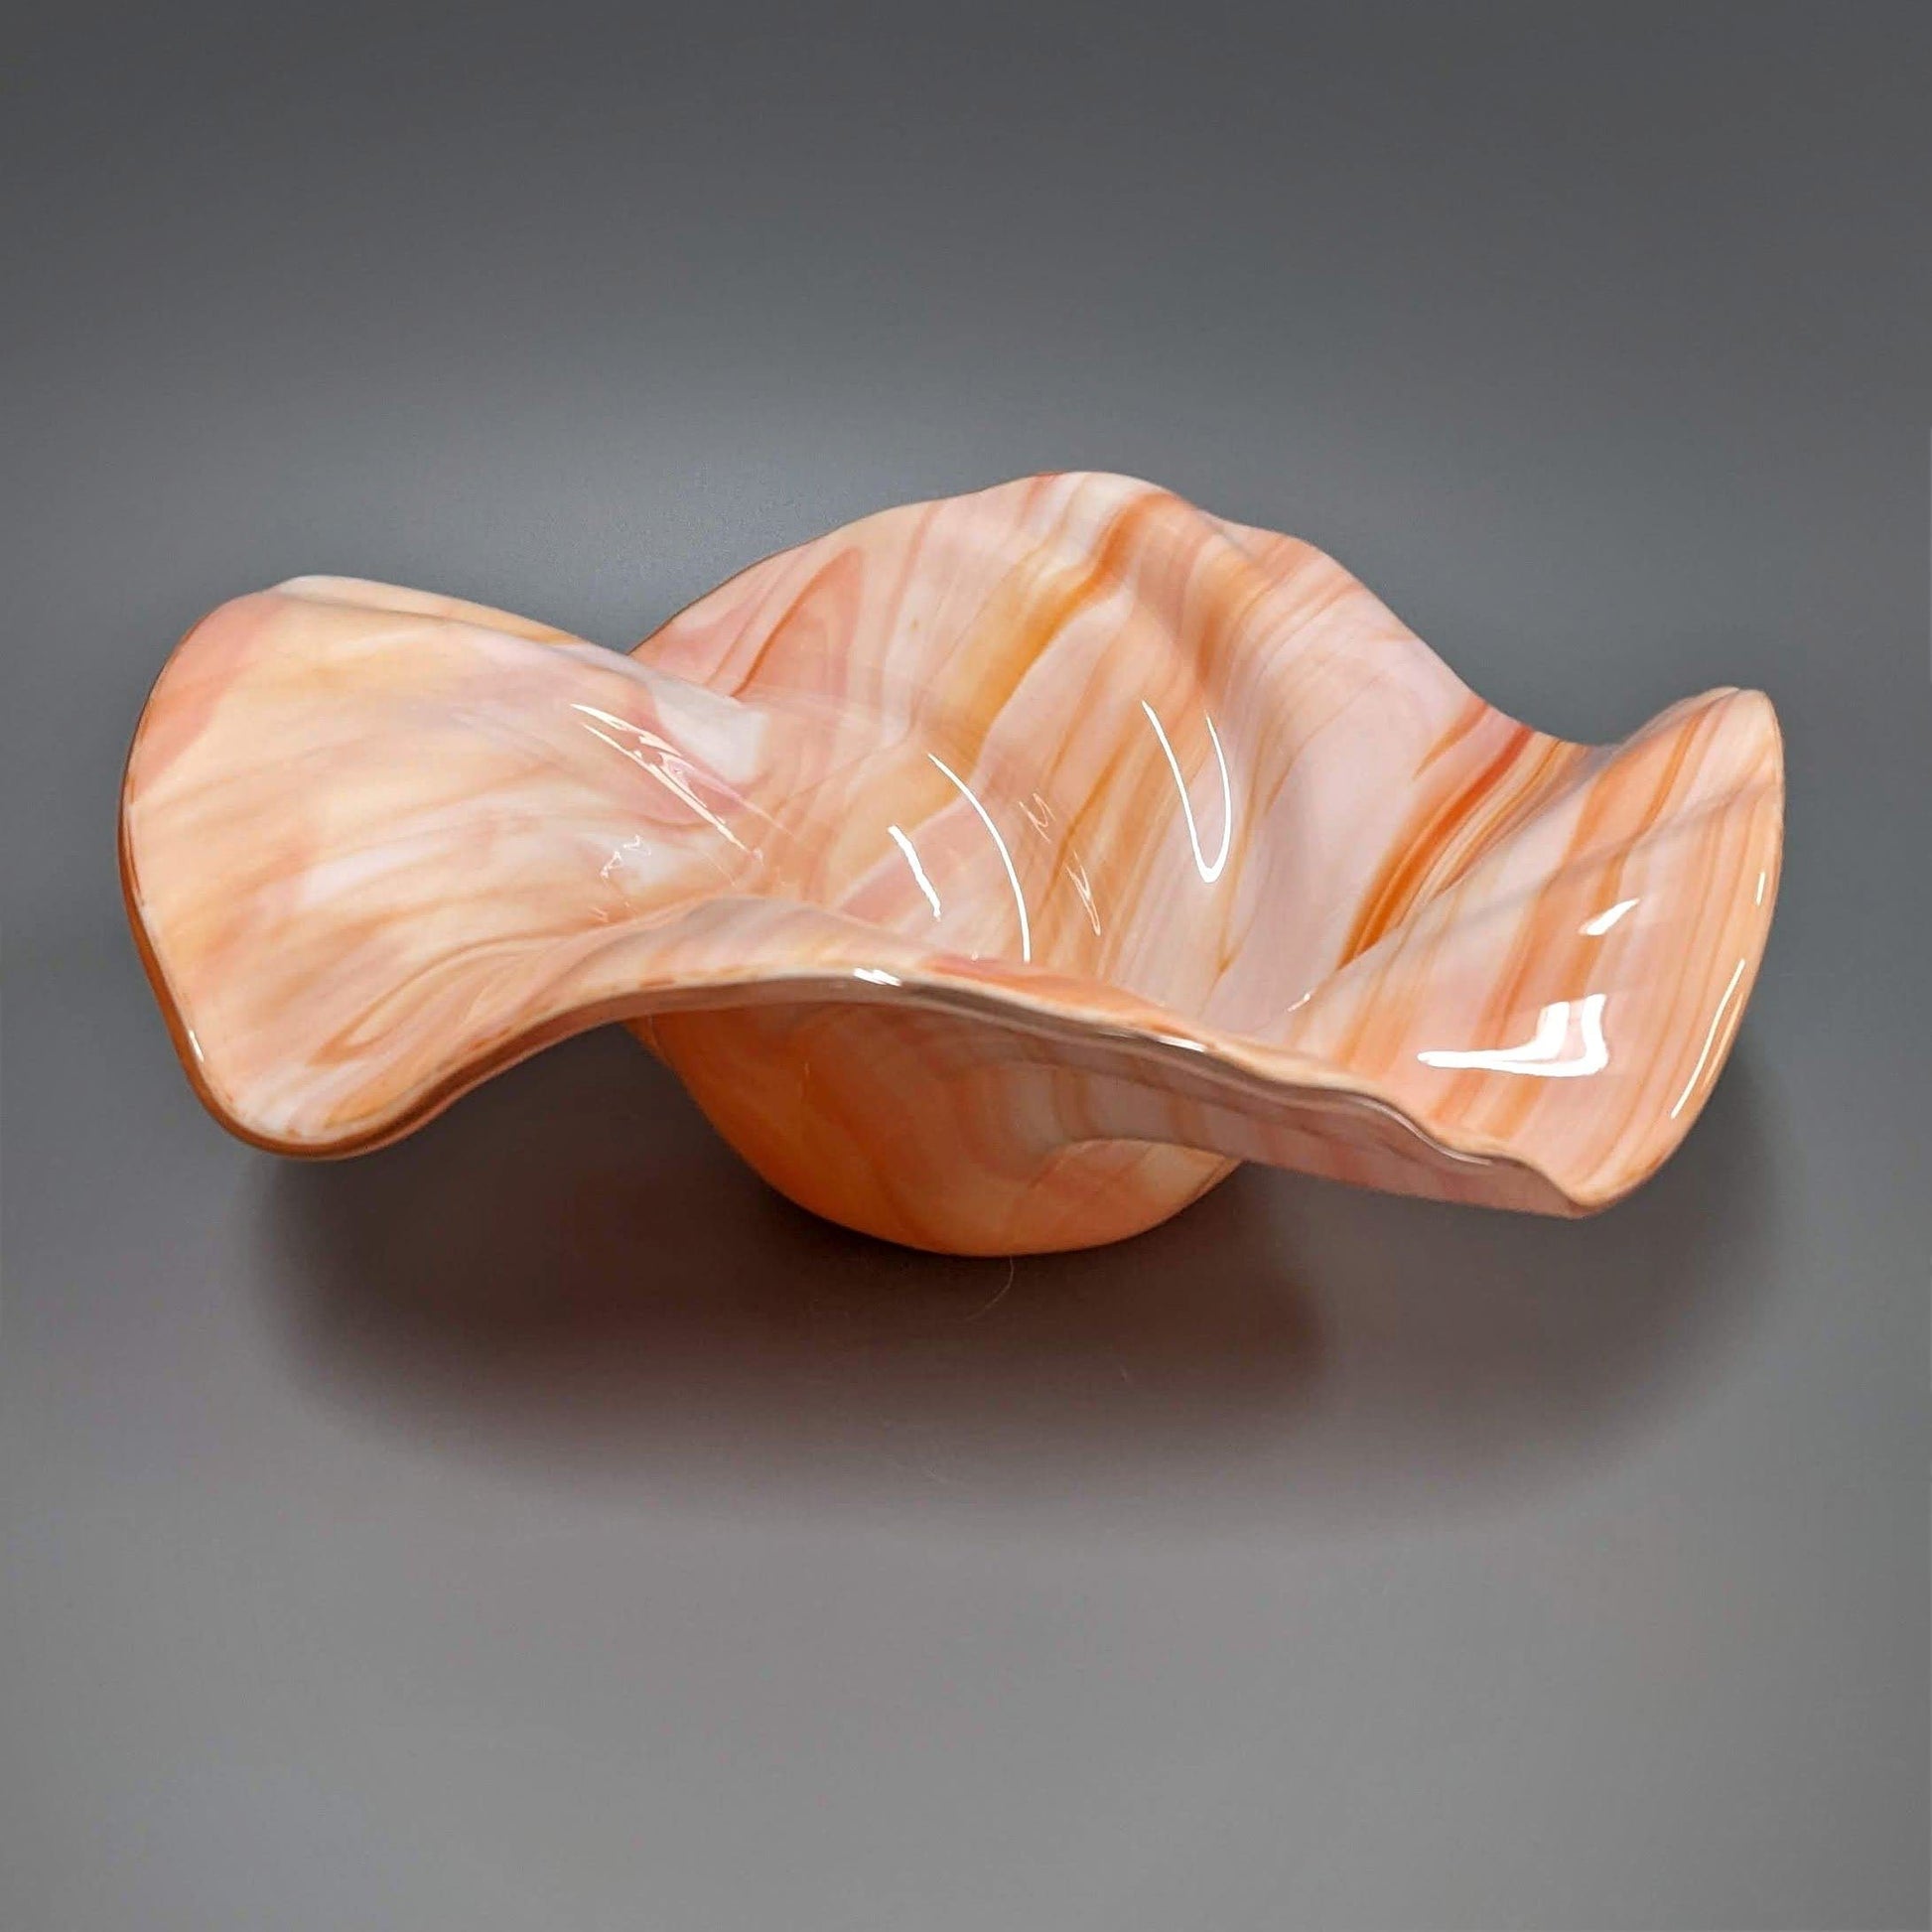 Glass Art Sculpture Wave Bowl in Shades of Orange | Home Décor Gifts | The Glass Rainbow